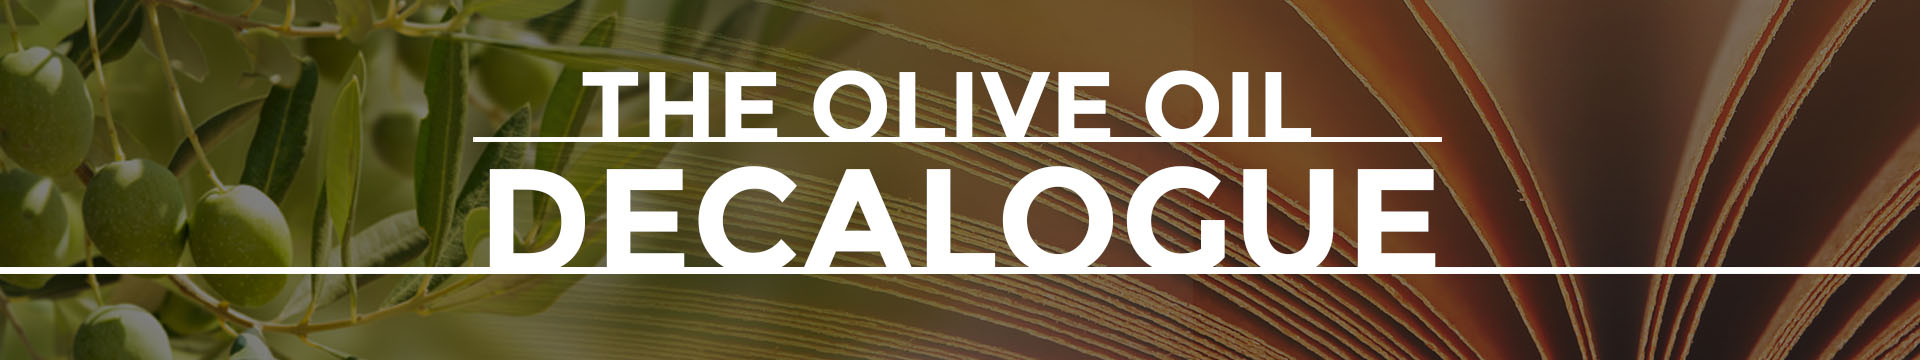 The olive oil Decalogue